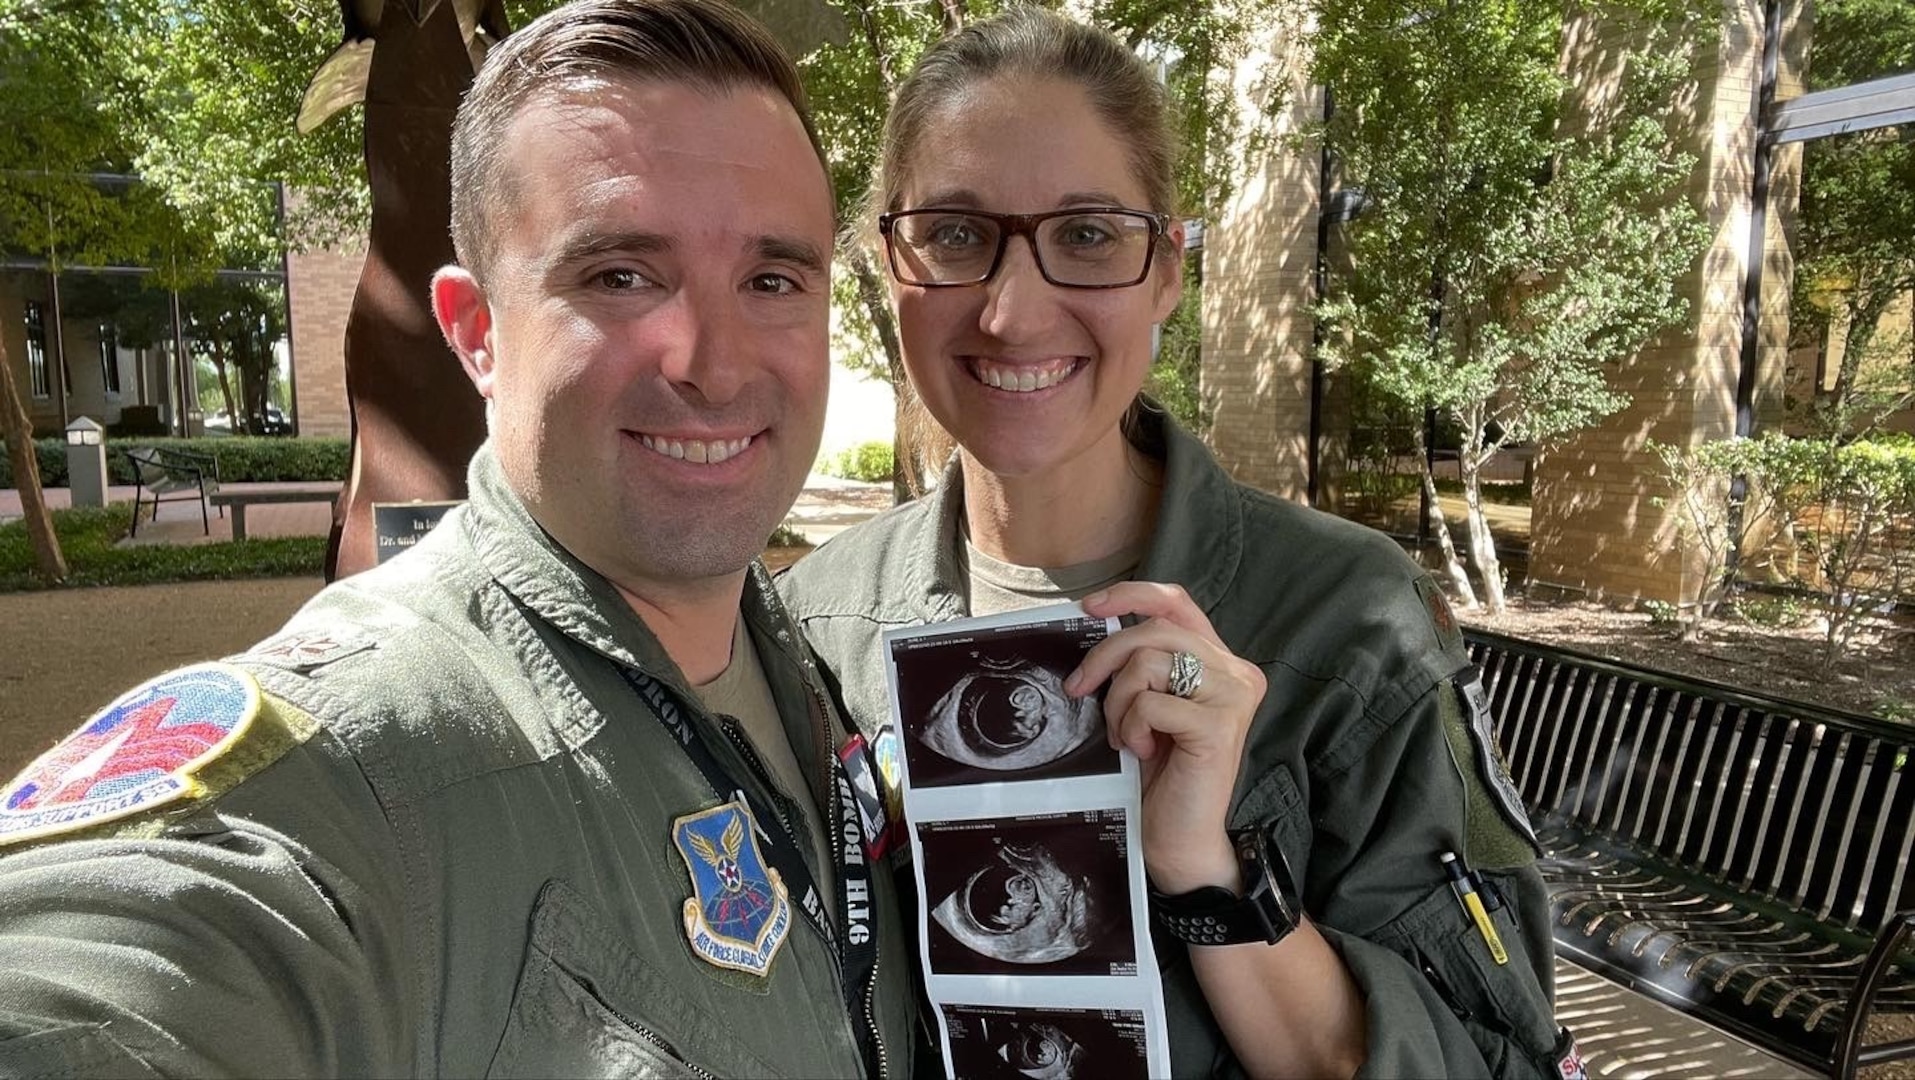 U.S. Air Force Maj. Lauren Olme, 77th Weapons Squadron assistant director of operations, and her husband, Maj. Mark Olme, 7th Operations Support Squadron bomb wing weapons officer, pose with an ultrasound photo of their child at Dyess Air Force Base, Texas, Jan. 24, 2023. Lauren, who is currently pregnant, can continue flying after recently getting approved under the Air Force’s new guidance which allows female aircrew members to voluntarily request to fly during pregnancy. No waiver is required to fly in the second trimester with an uncomplicated pregnancy in a non-ejection seat aircraft if all flight safety criteria are met. All pregnant aircrew members are also authorized to apply for a waiver regardless of trimester, aircraft or flight profile. (Courtesy photo)